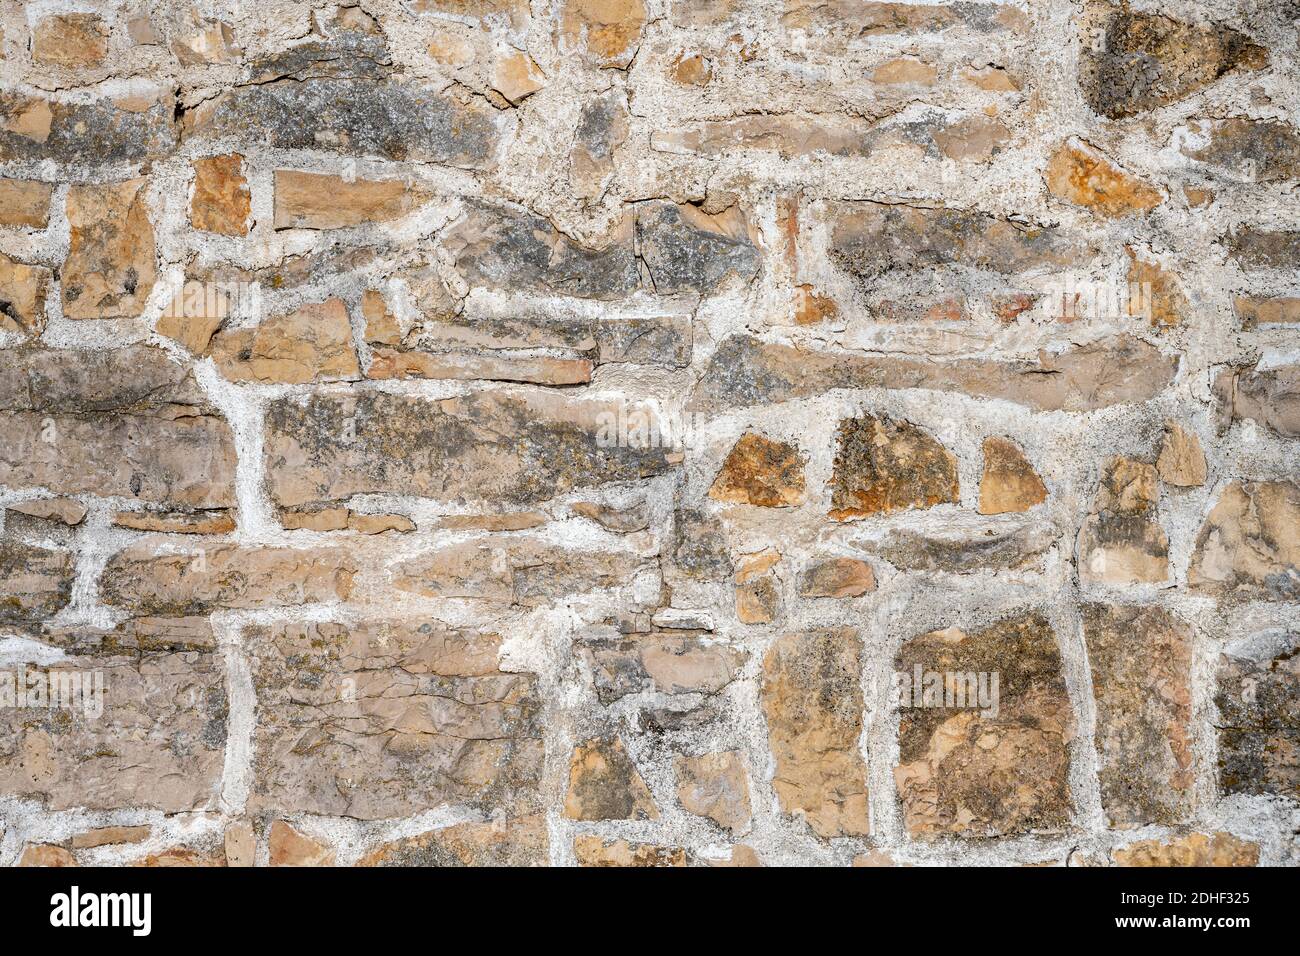 Background from an irregular natural stone wall Stock Photo